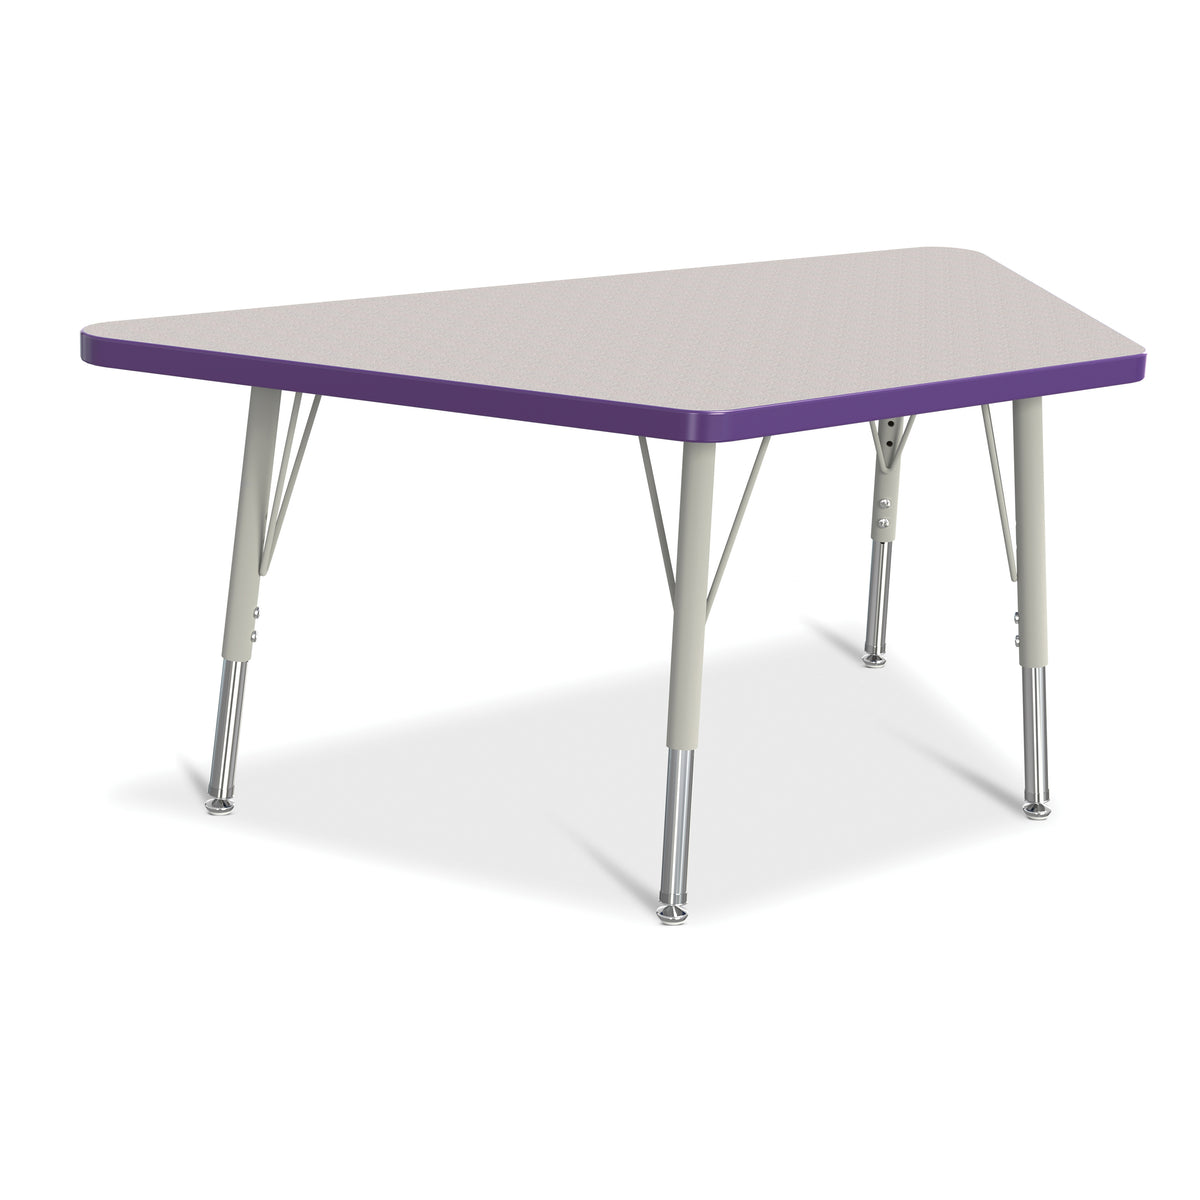 6438JCE004, Berries Trapezoid Activity Tables - 24" X 48", E-height - Freckled Gray/Purple/Gray